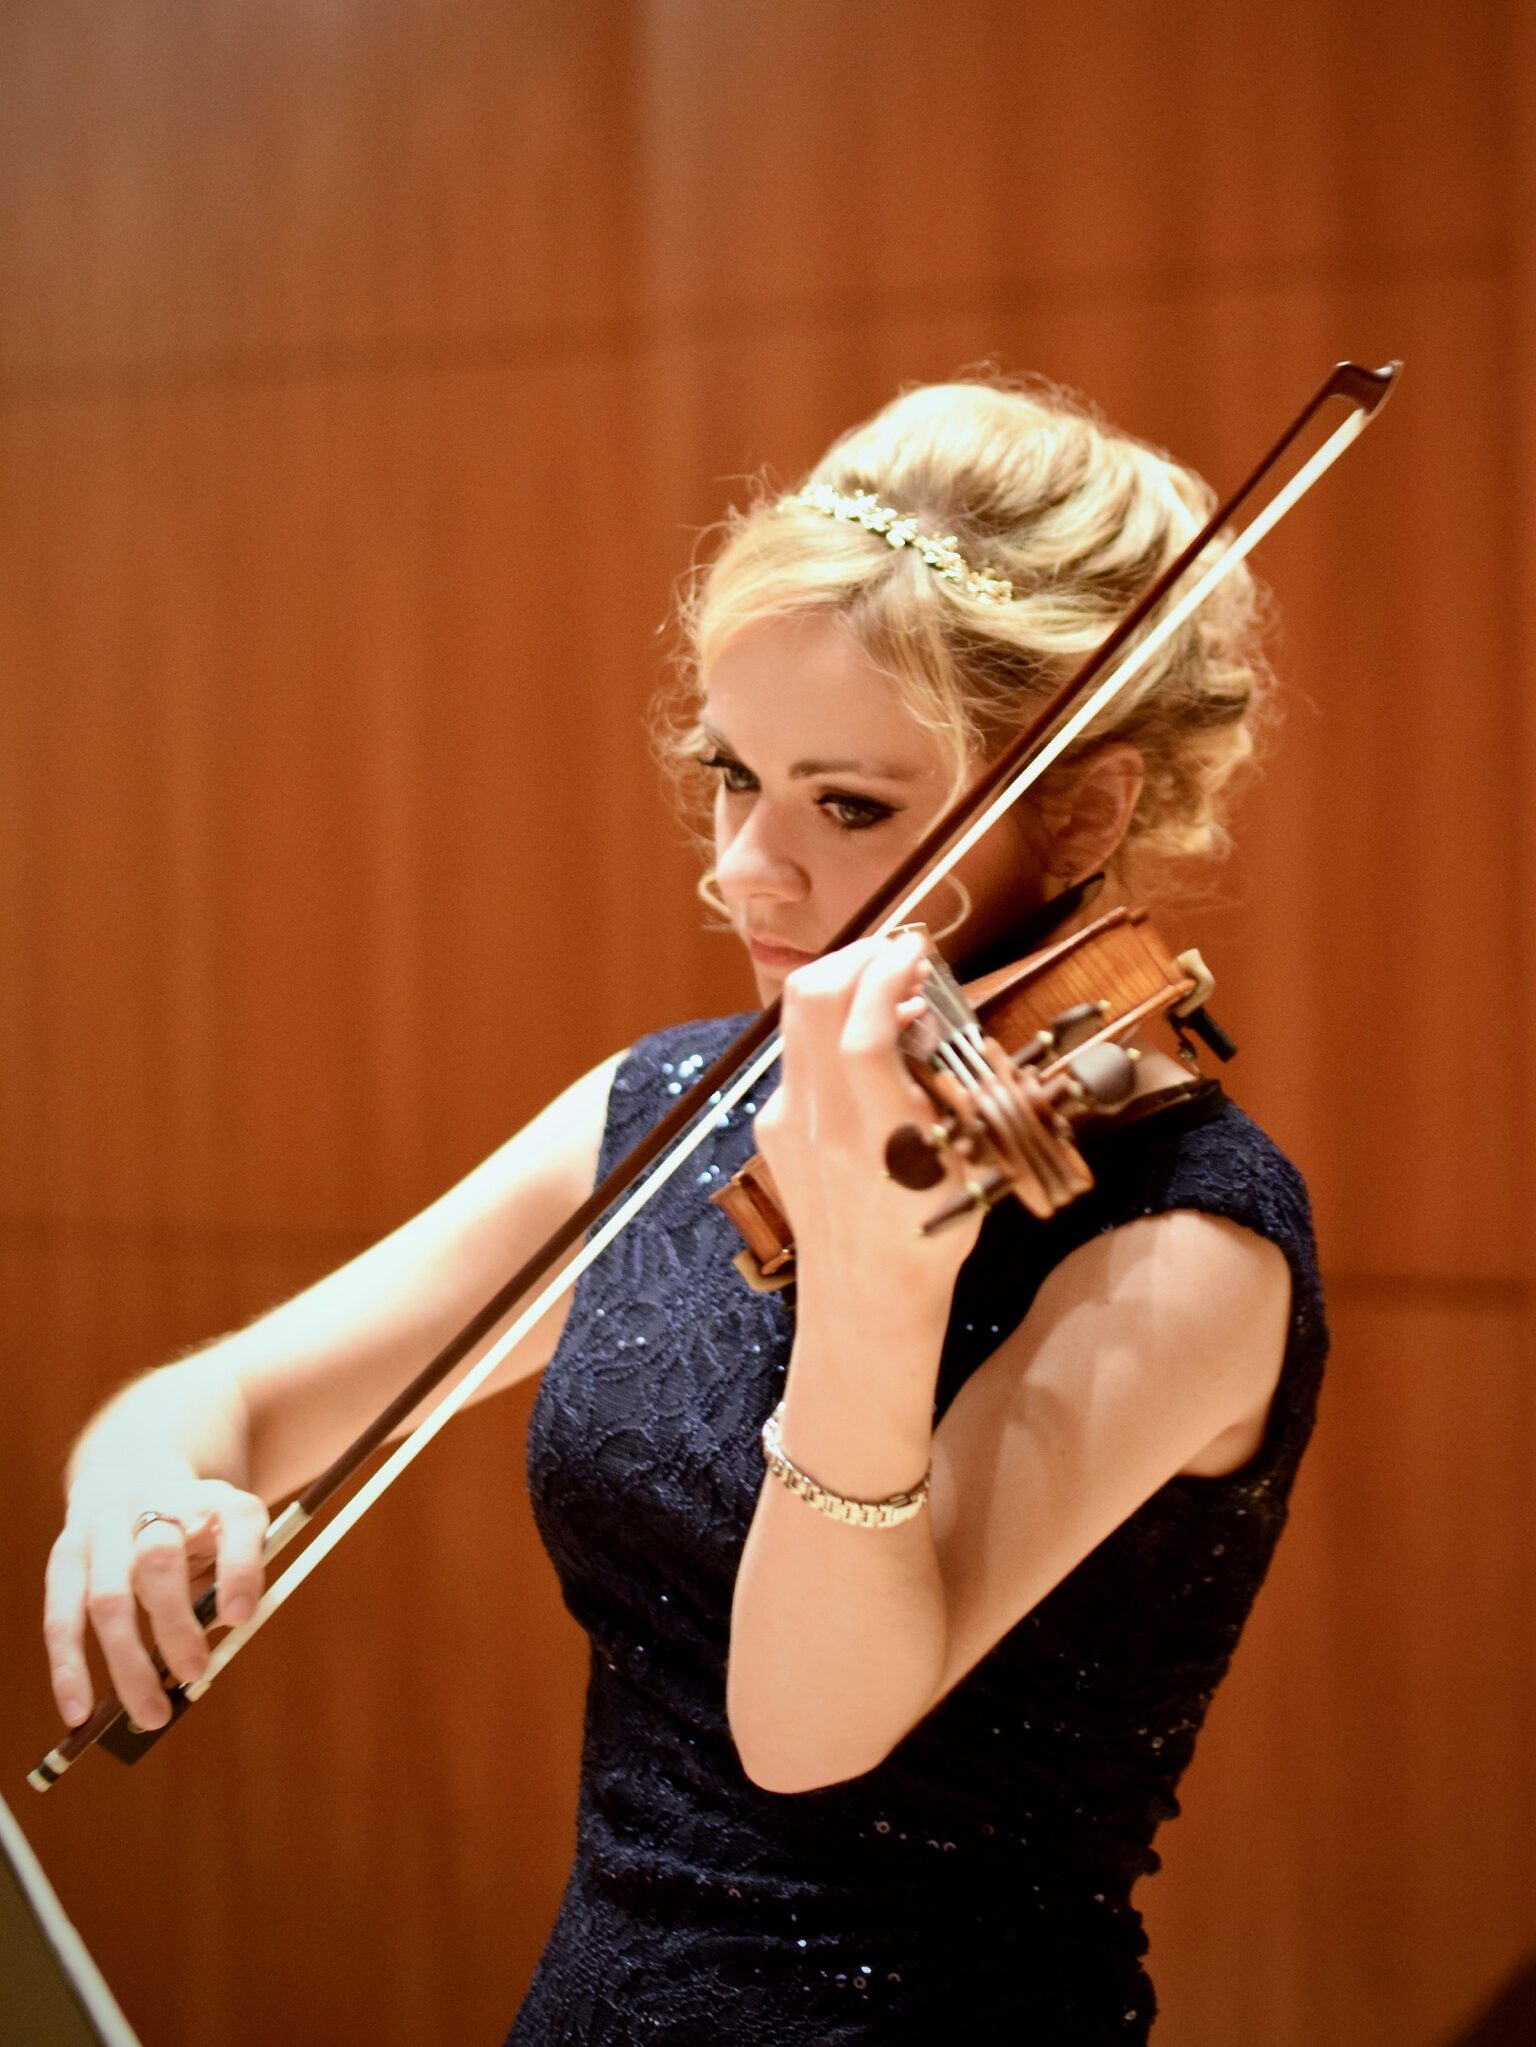 Holly Workman, Geige, violin, performing on stage in a concert wearing a blue dress